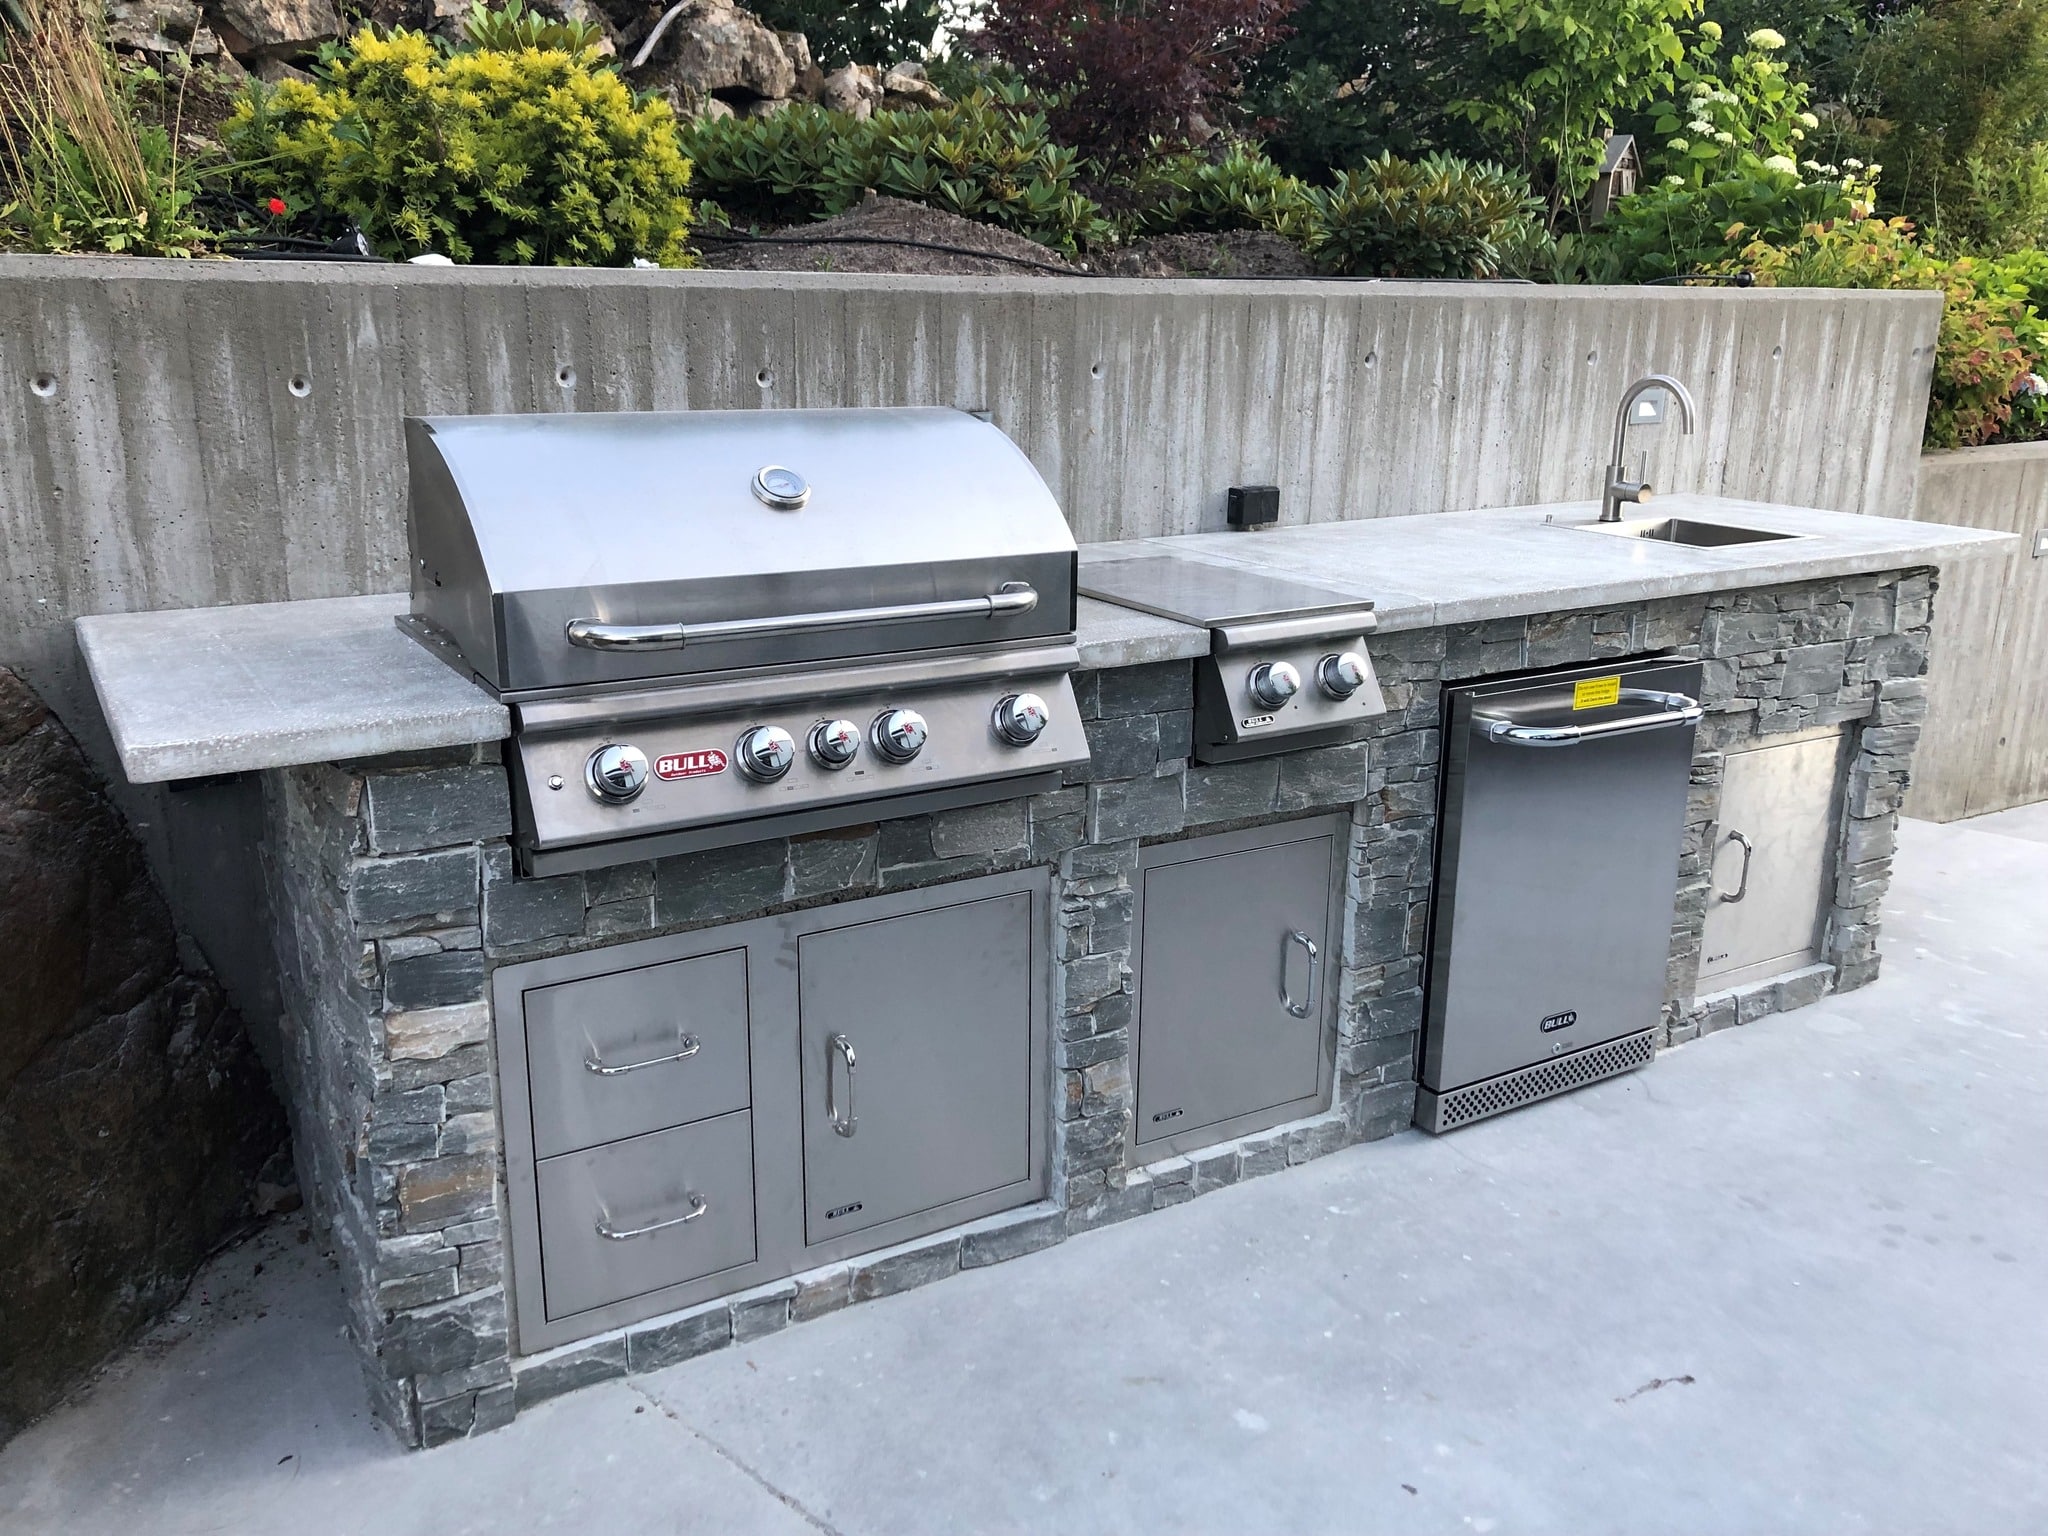 Outdoor bbq kitchen and stainless steel grill with fridge